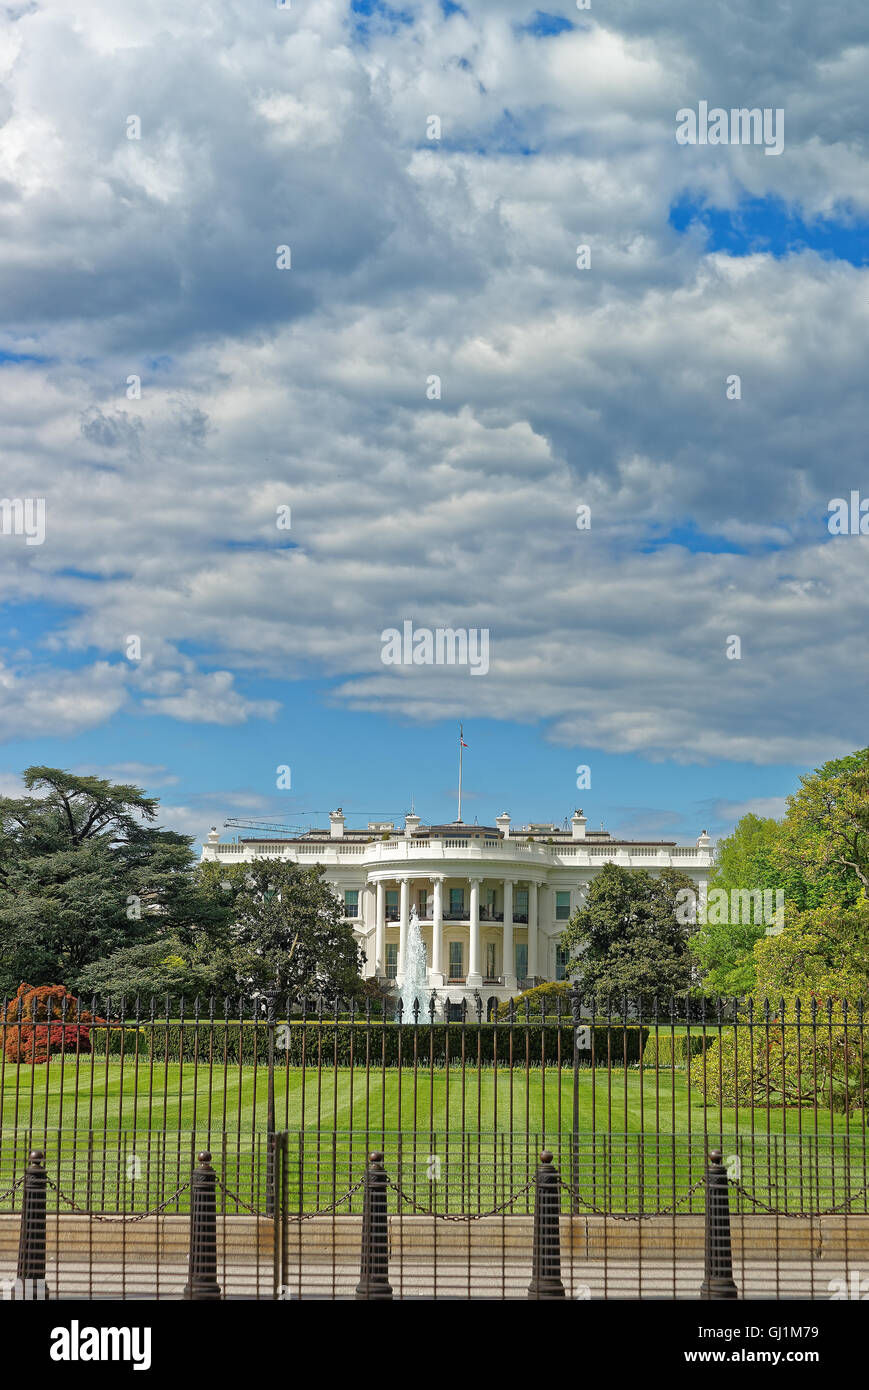 Look at the White House in Washington D.C., USA. The official residence and workplace for the current US President. It was completed in 1800 and the first President who lived there was John Adams. Stock Photo